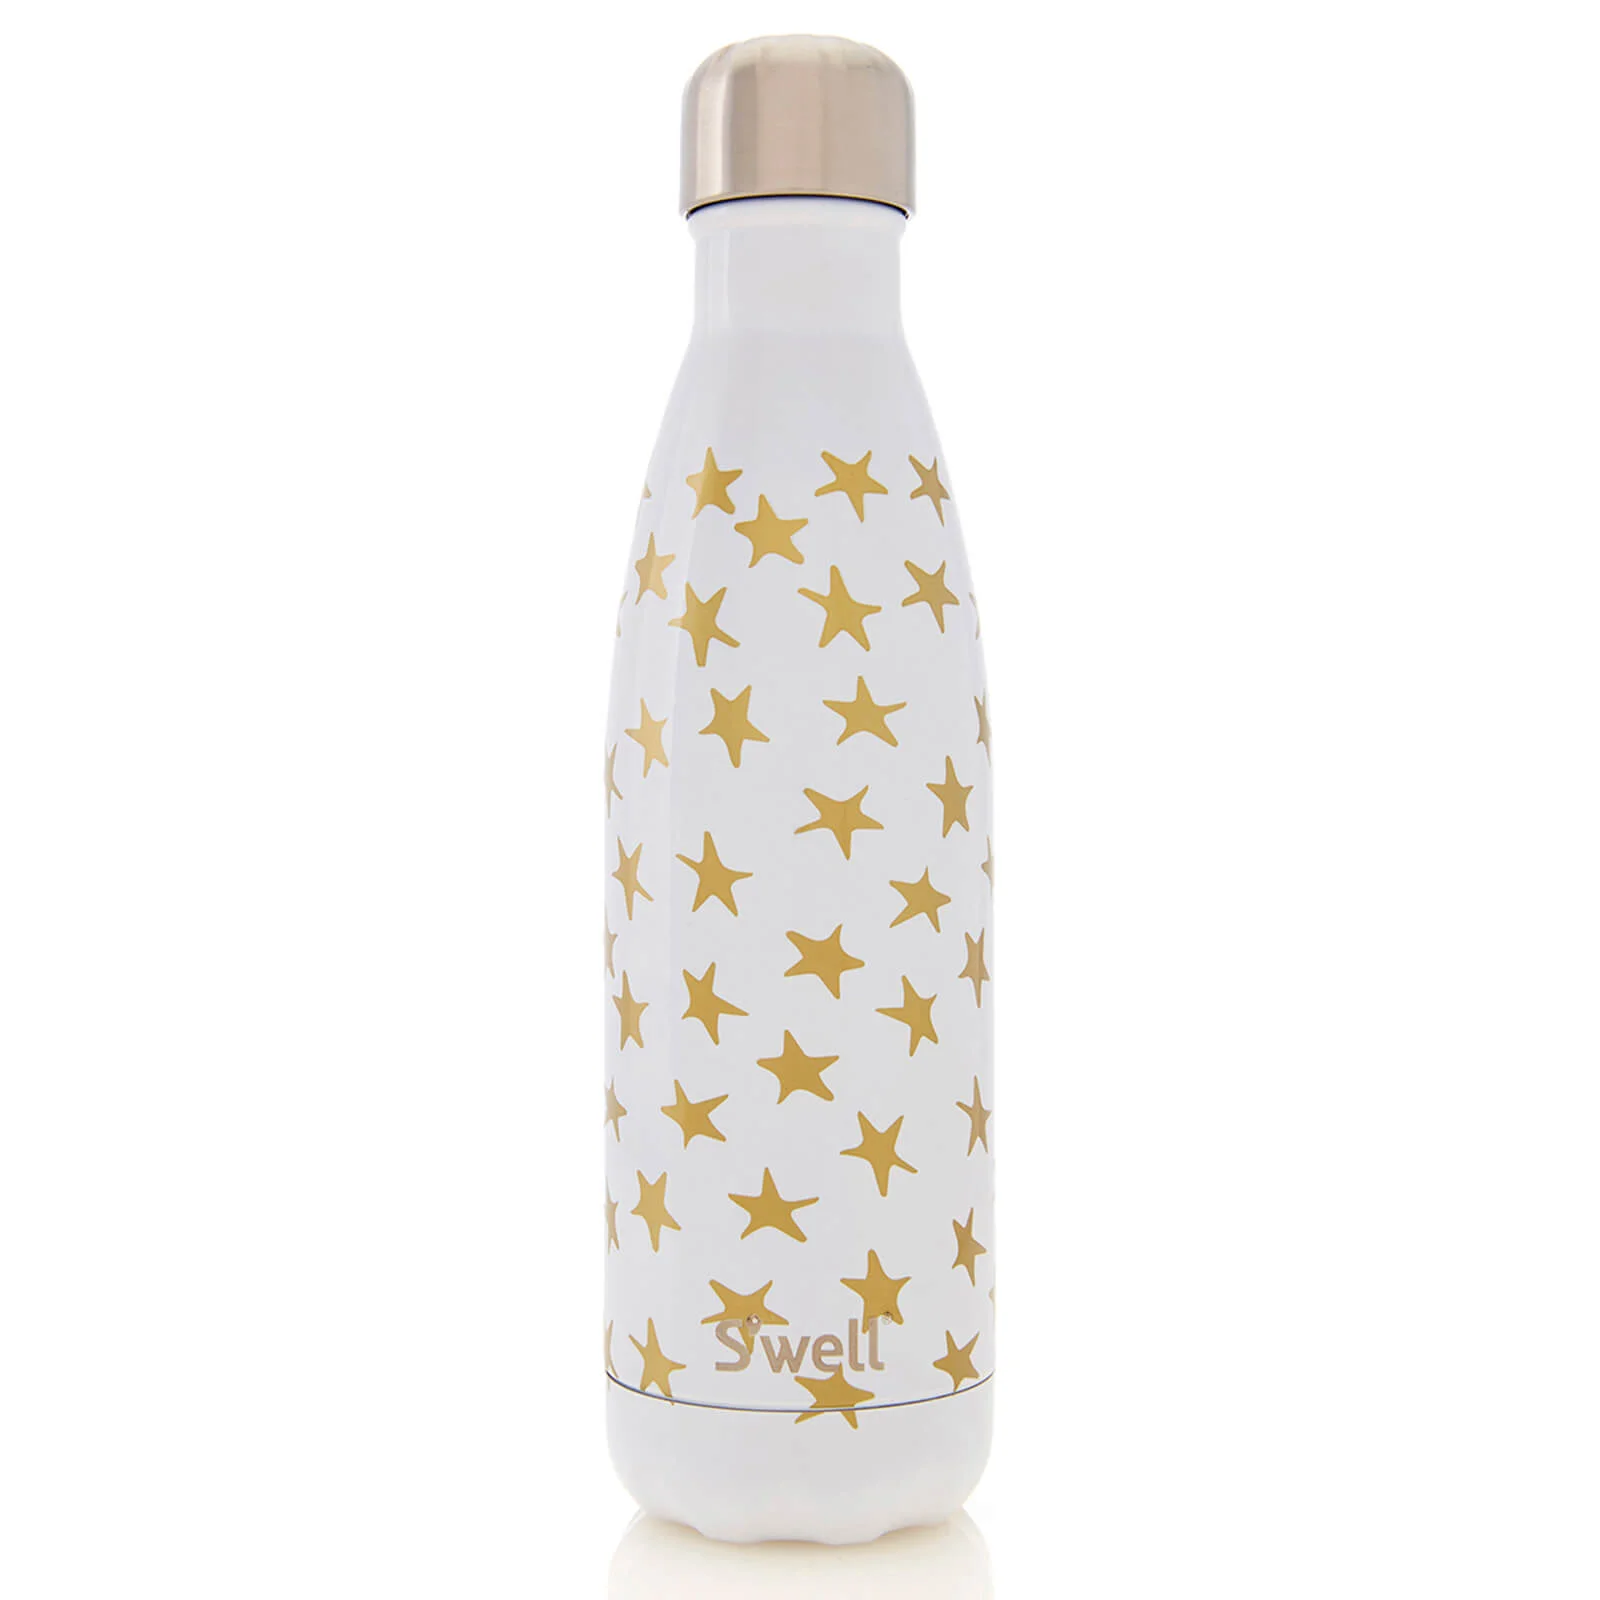 S'well The Love Star-Crossed Water Bottle 500ml Image 1